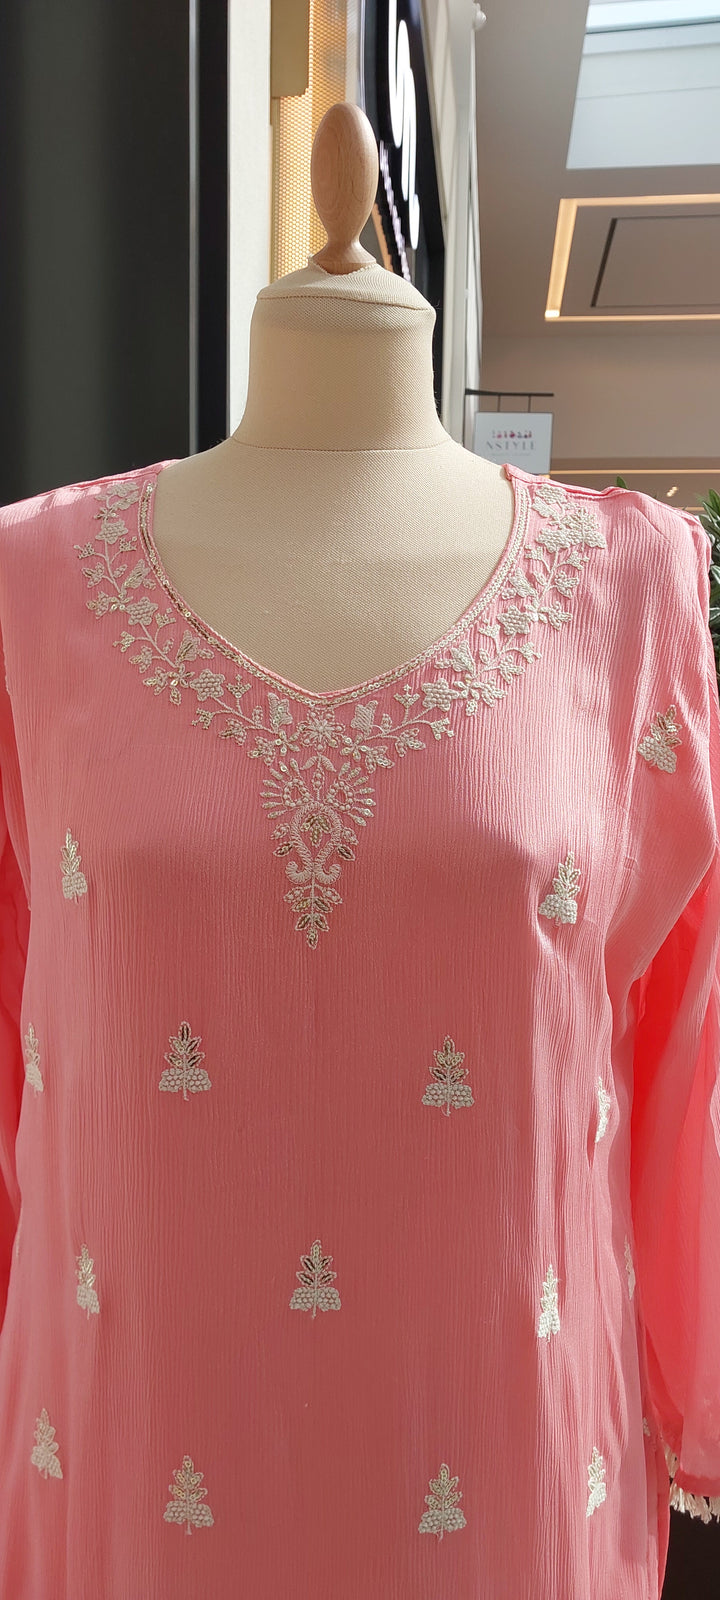 Shraddha Ready to wear Peach Pink stitched Suit With Beautiful Shirt, Pant and Dupatta